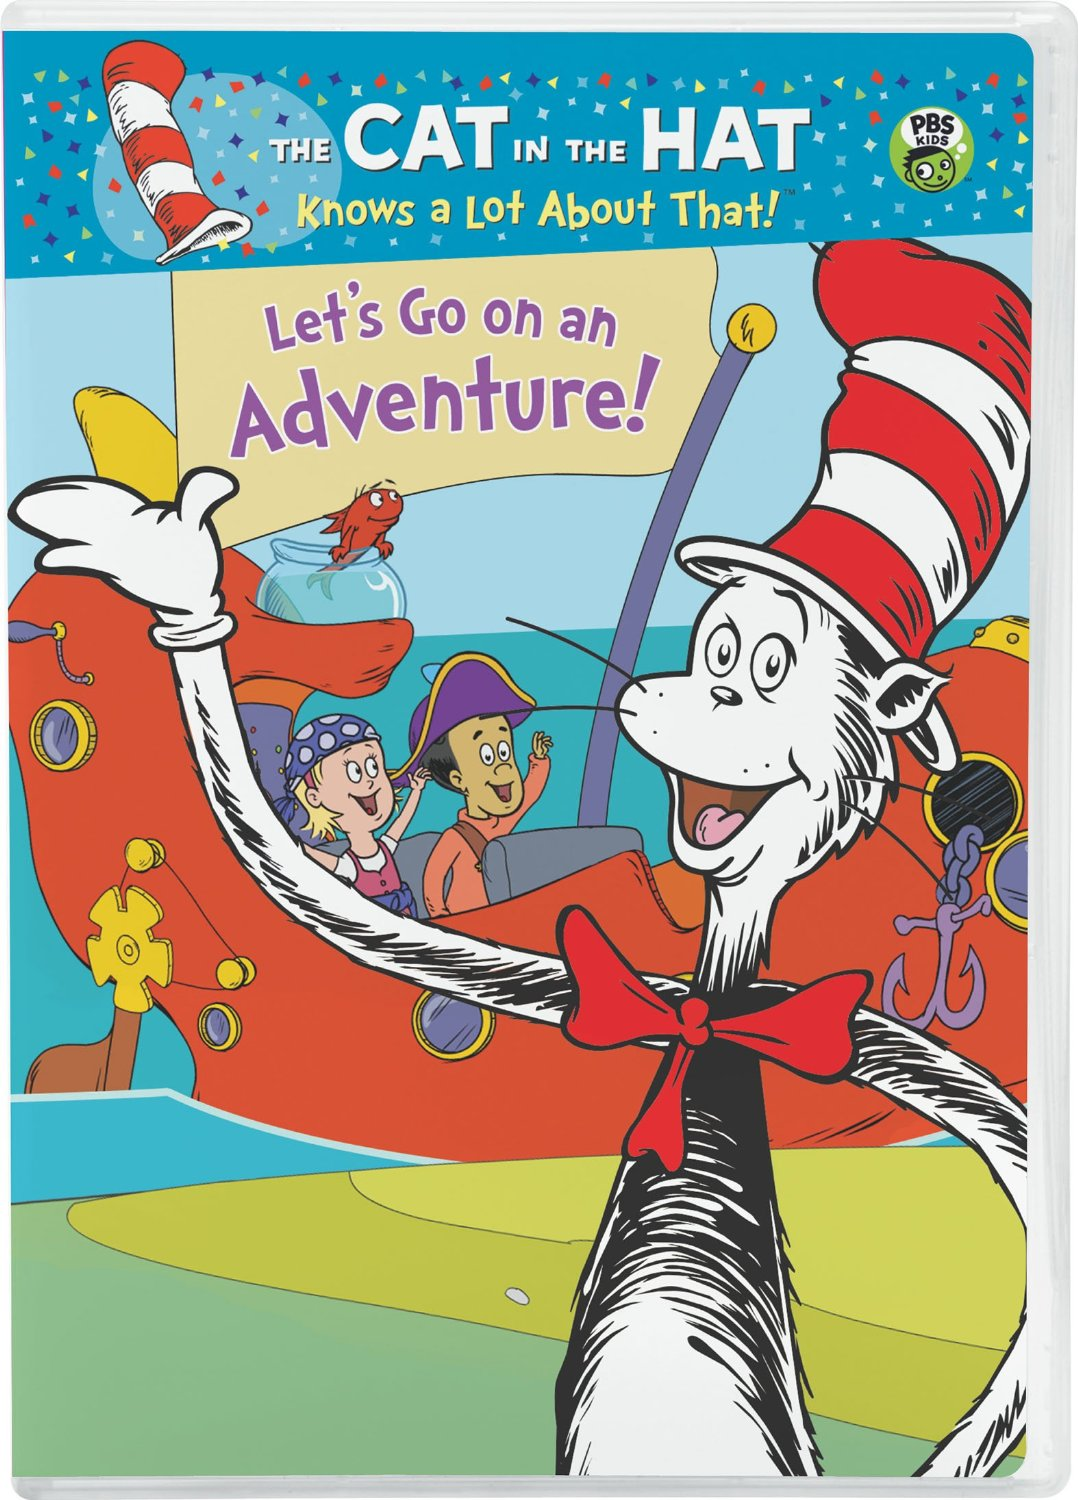 Inspired by Savannah New "Cat in the Hat" DVD from NCircle